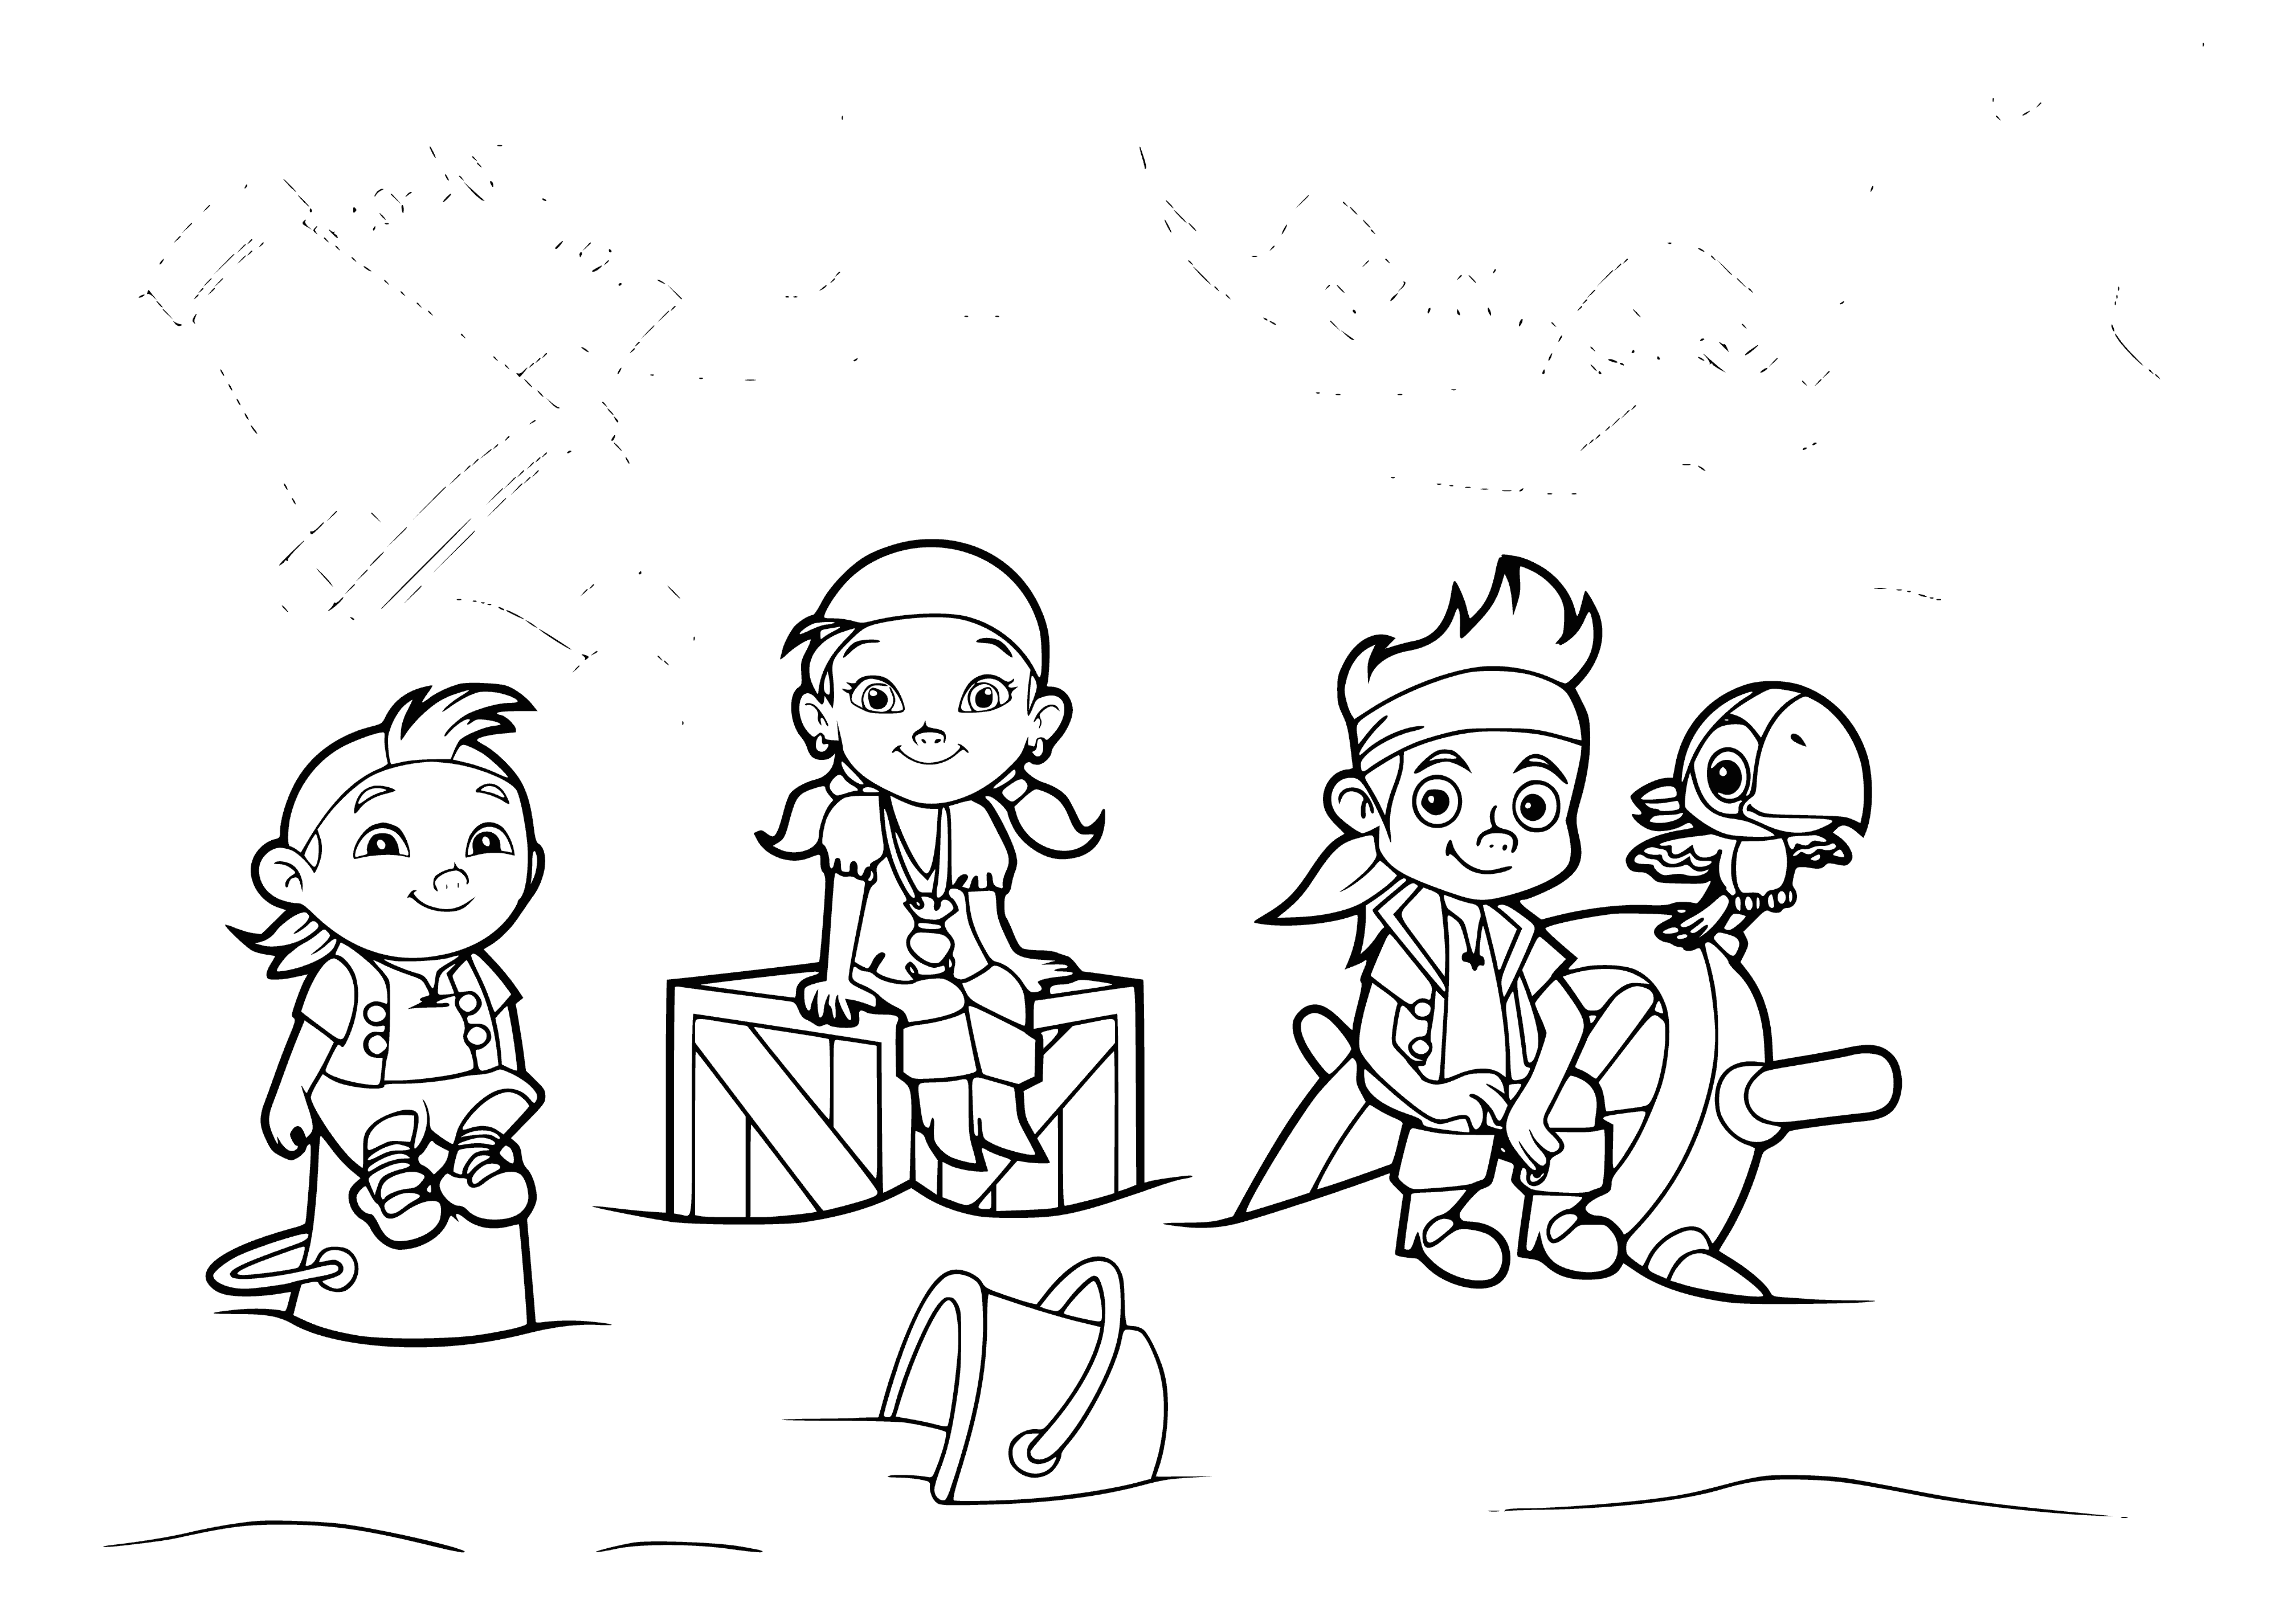 coloring page: 4 figures in coloring page: kids holding sword & wand; adults holding rifle & book.